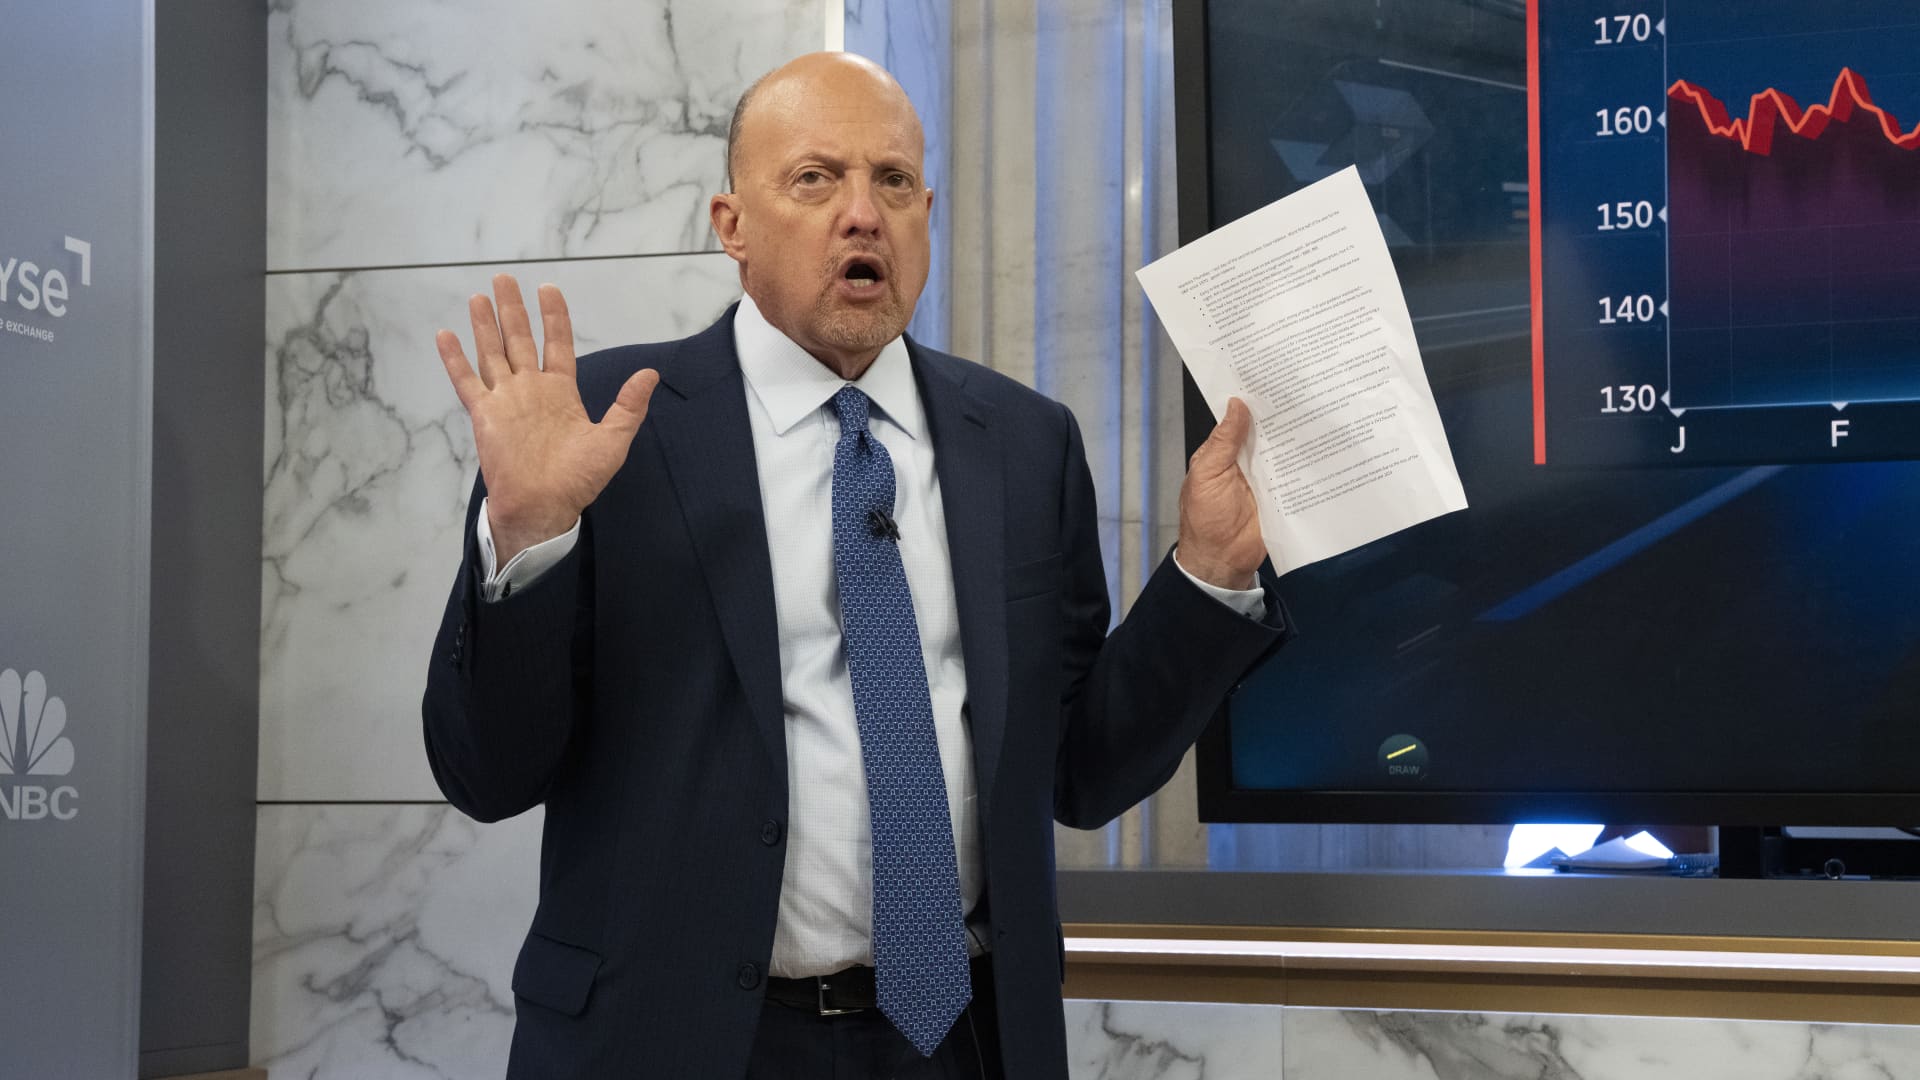 Jim Cramer’s Investing Club conference Friday: Overbought marketplace, Wells Fargo, Estee Lauder